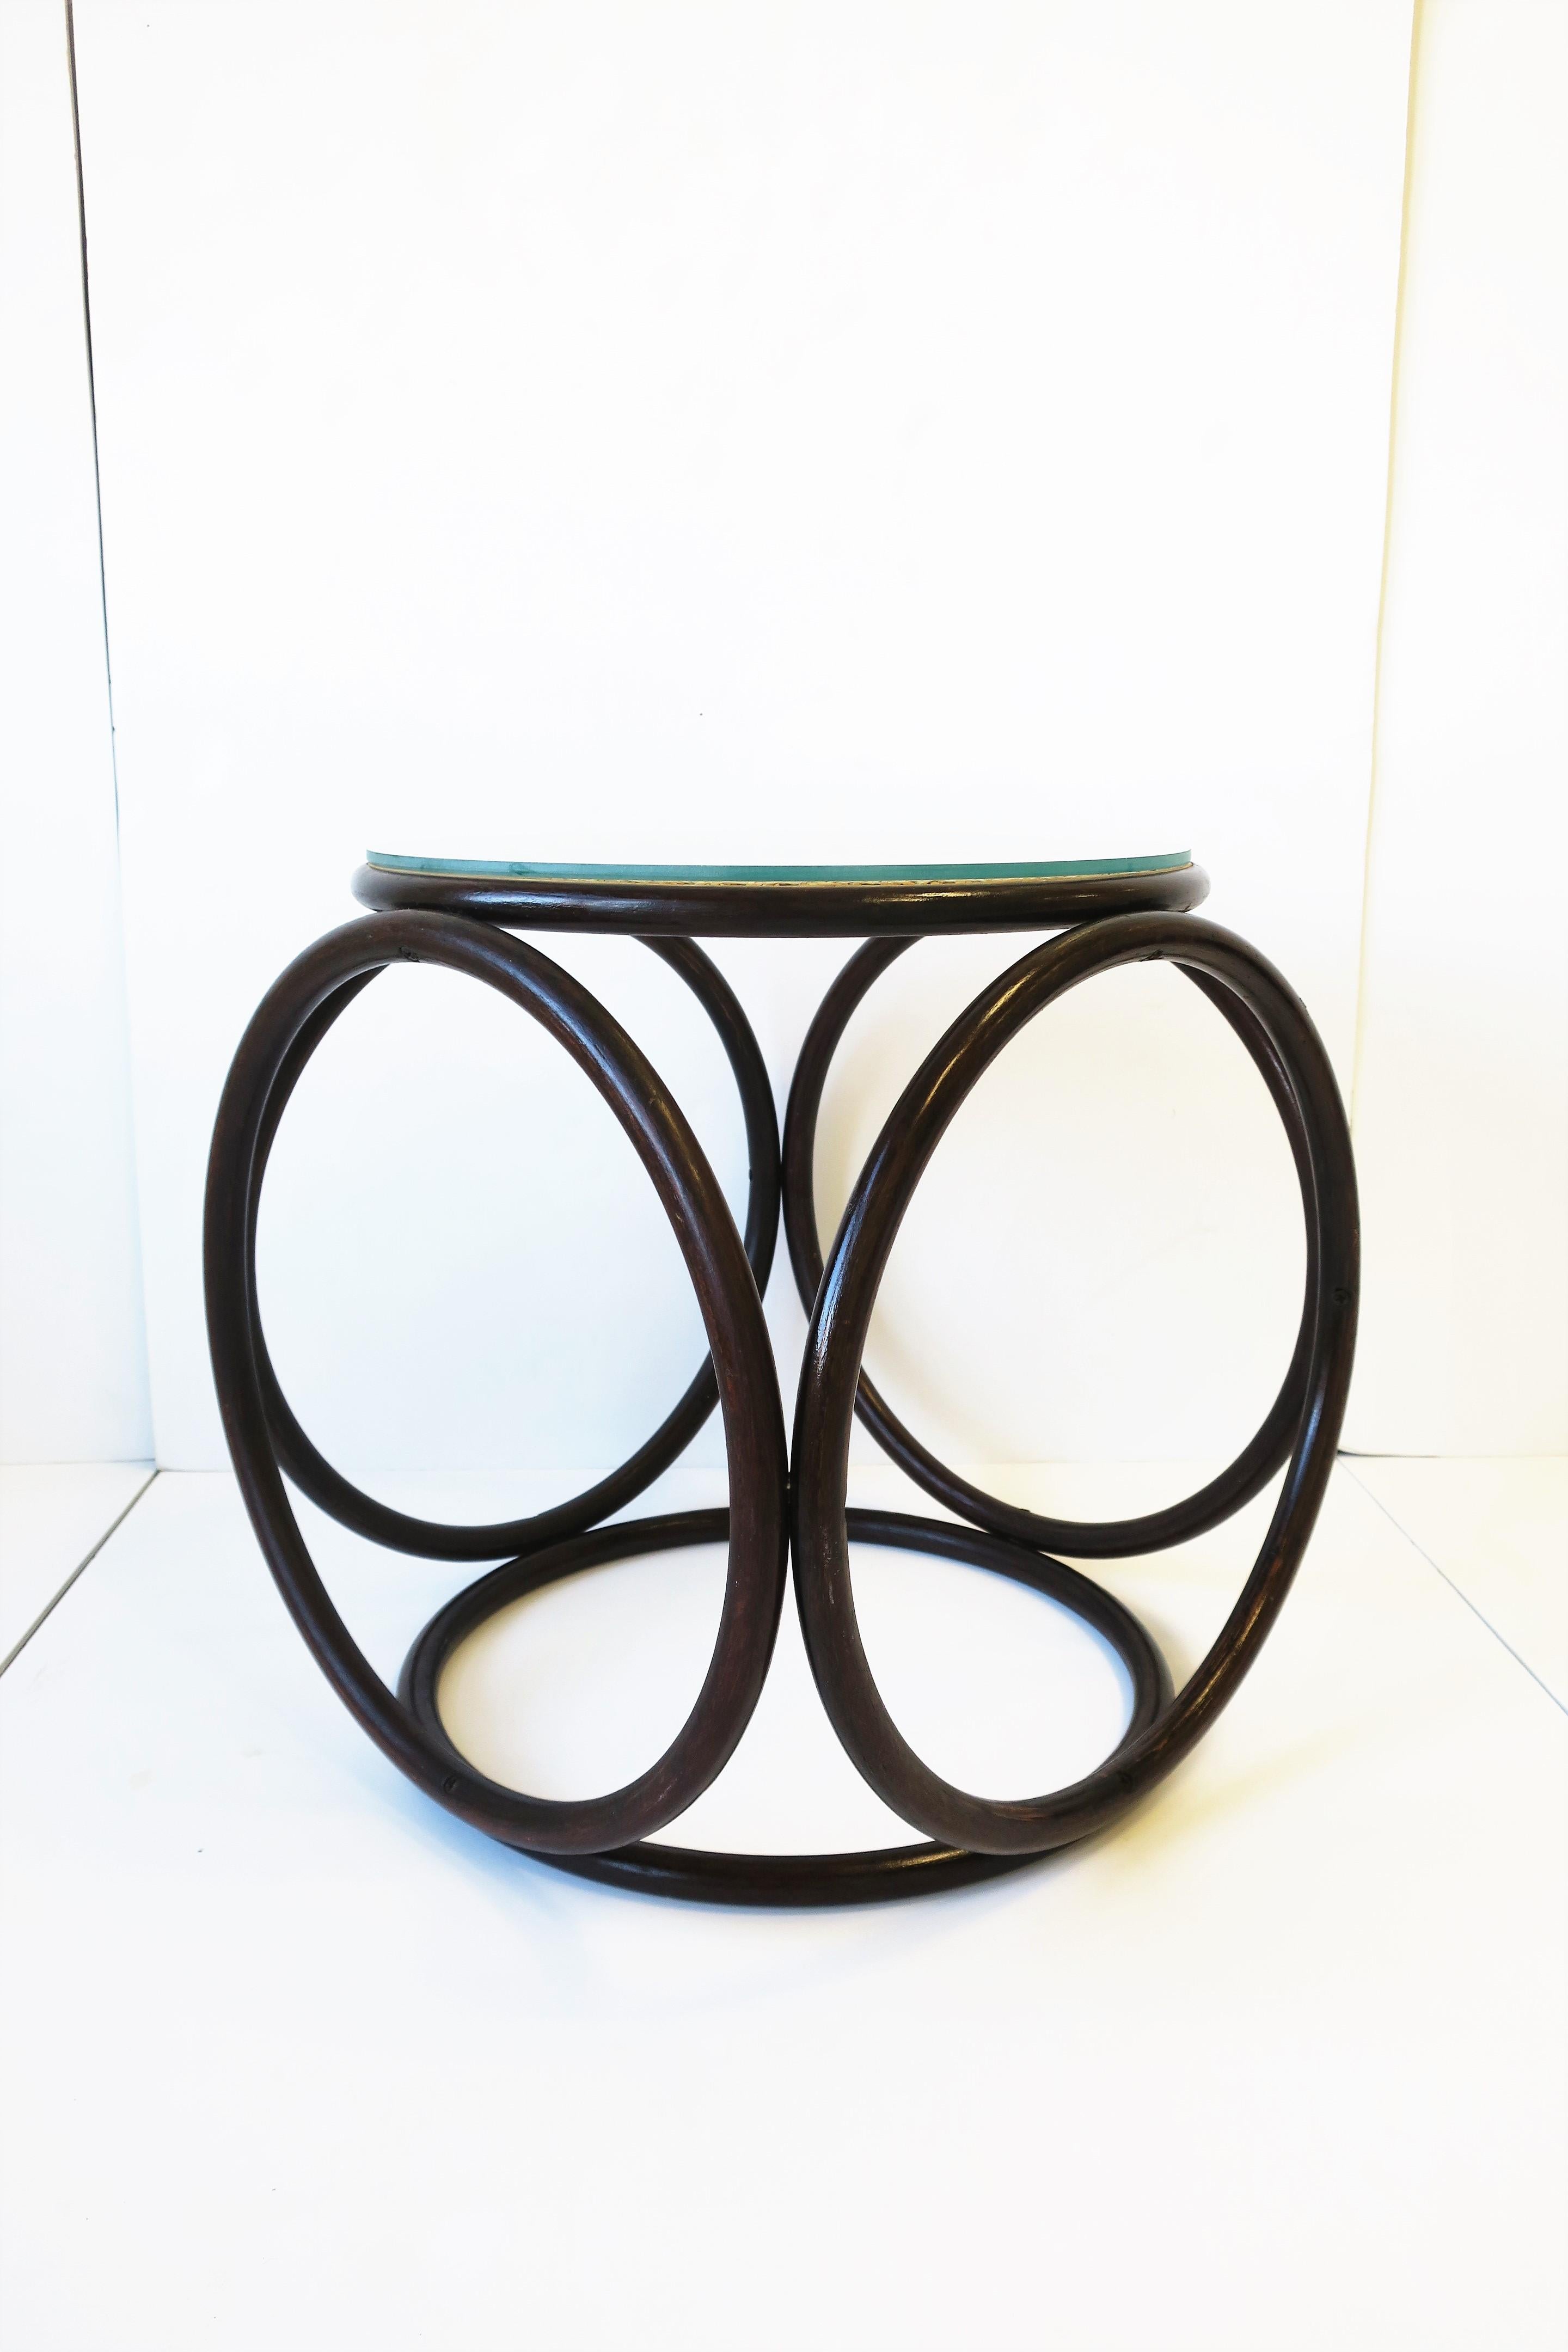 Austrian Bentwood Cane and Glass Top Side Drinks Table or Stool in the Style of Thonet For Sale